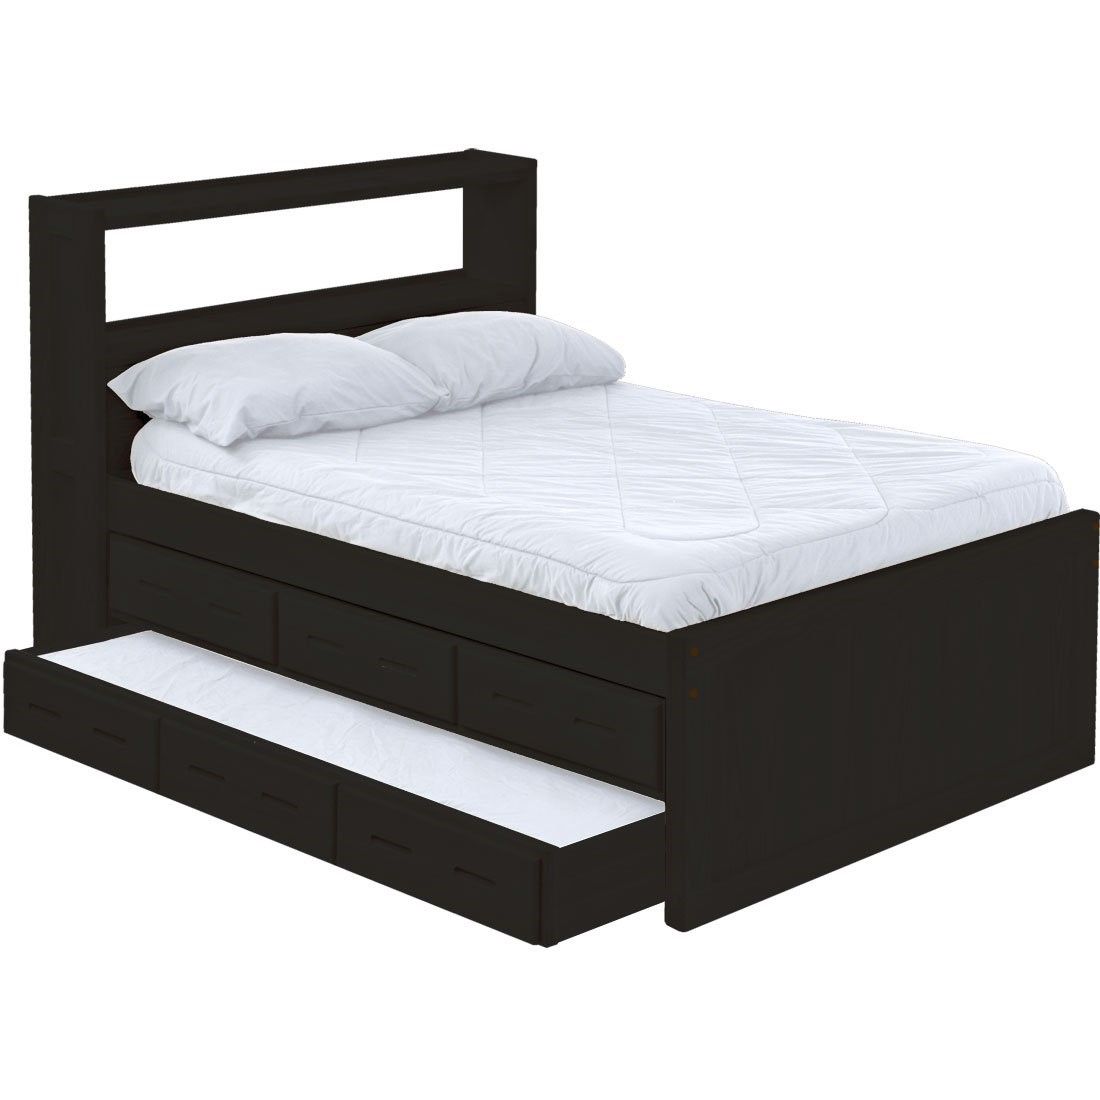 Captain Bed Panel Design Double Xl, Full Xl Bed Frame Ikea